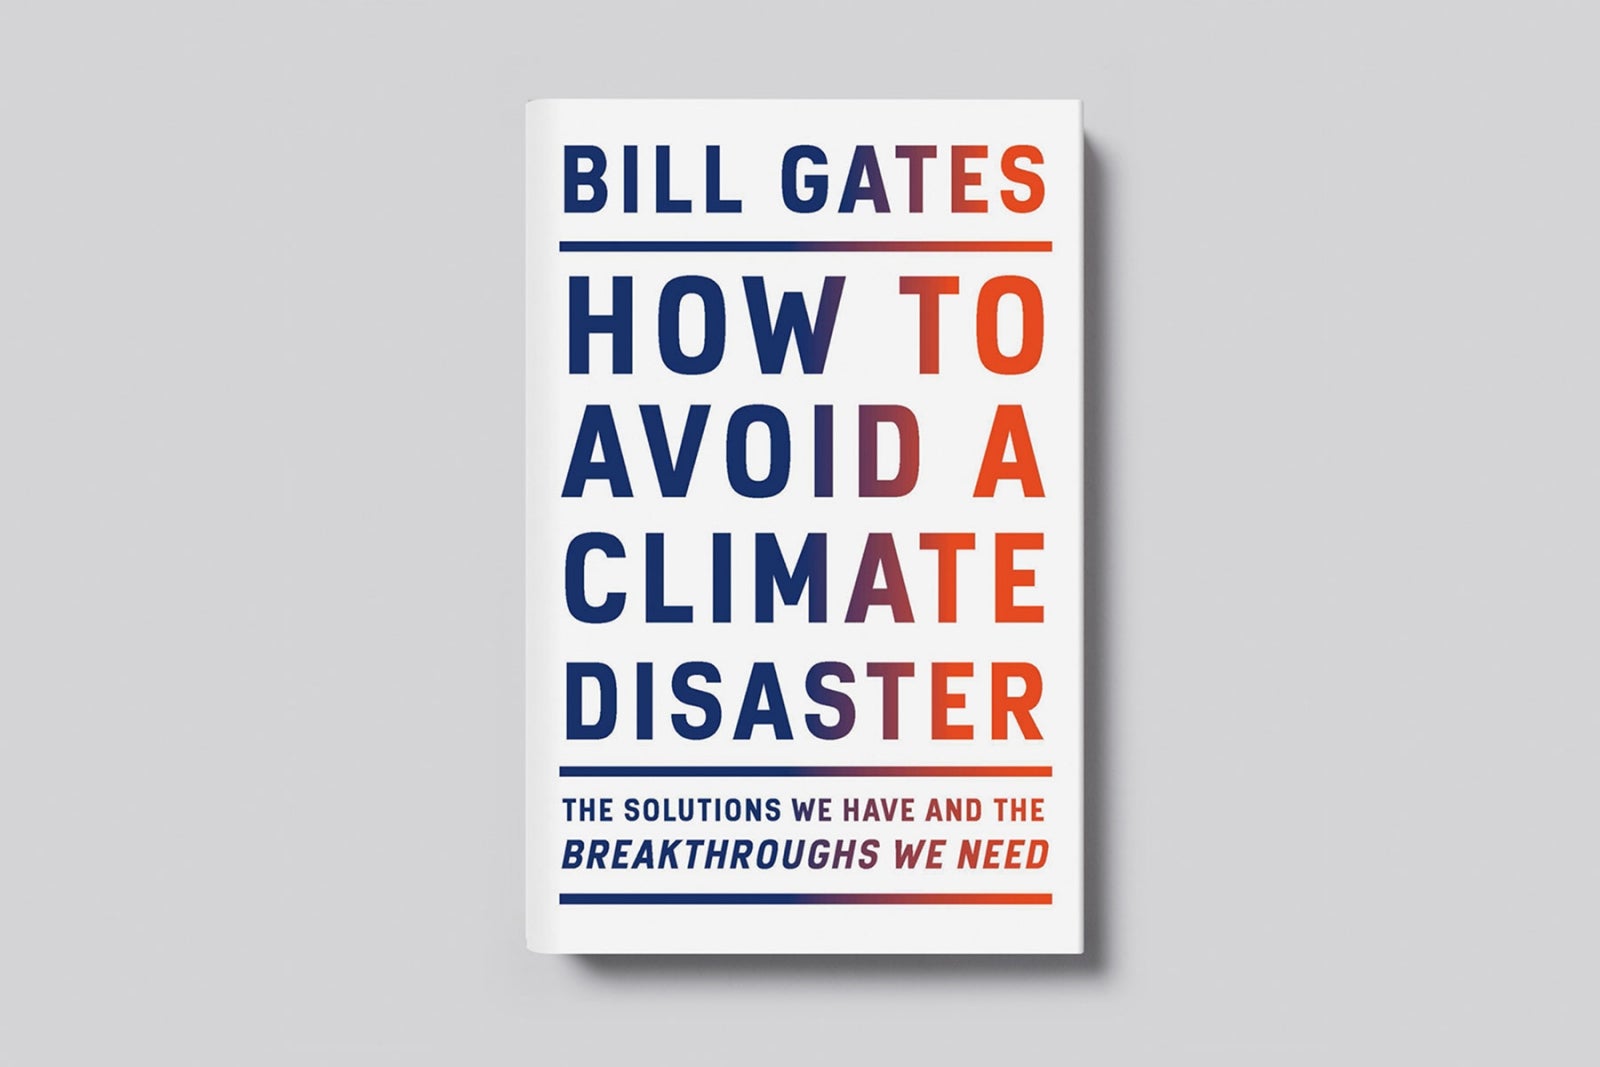 Bill Gates’s HOW TO AVOID A CLIMATE DISASTER: On Sale Today!